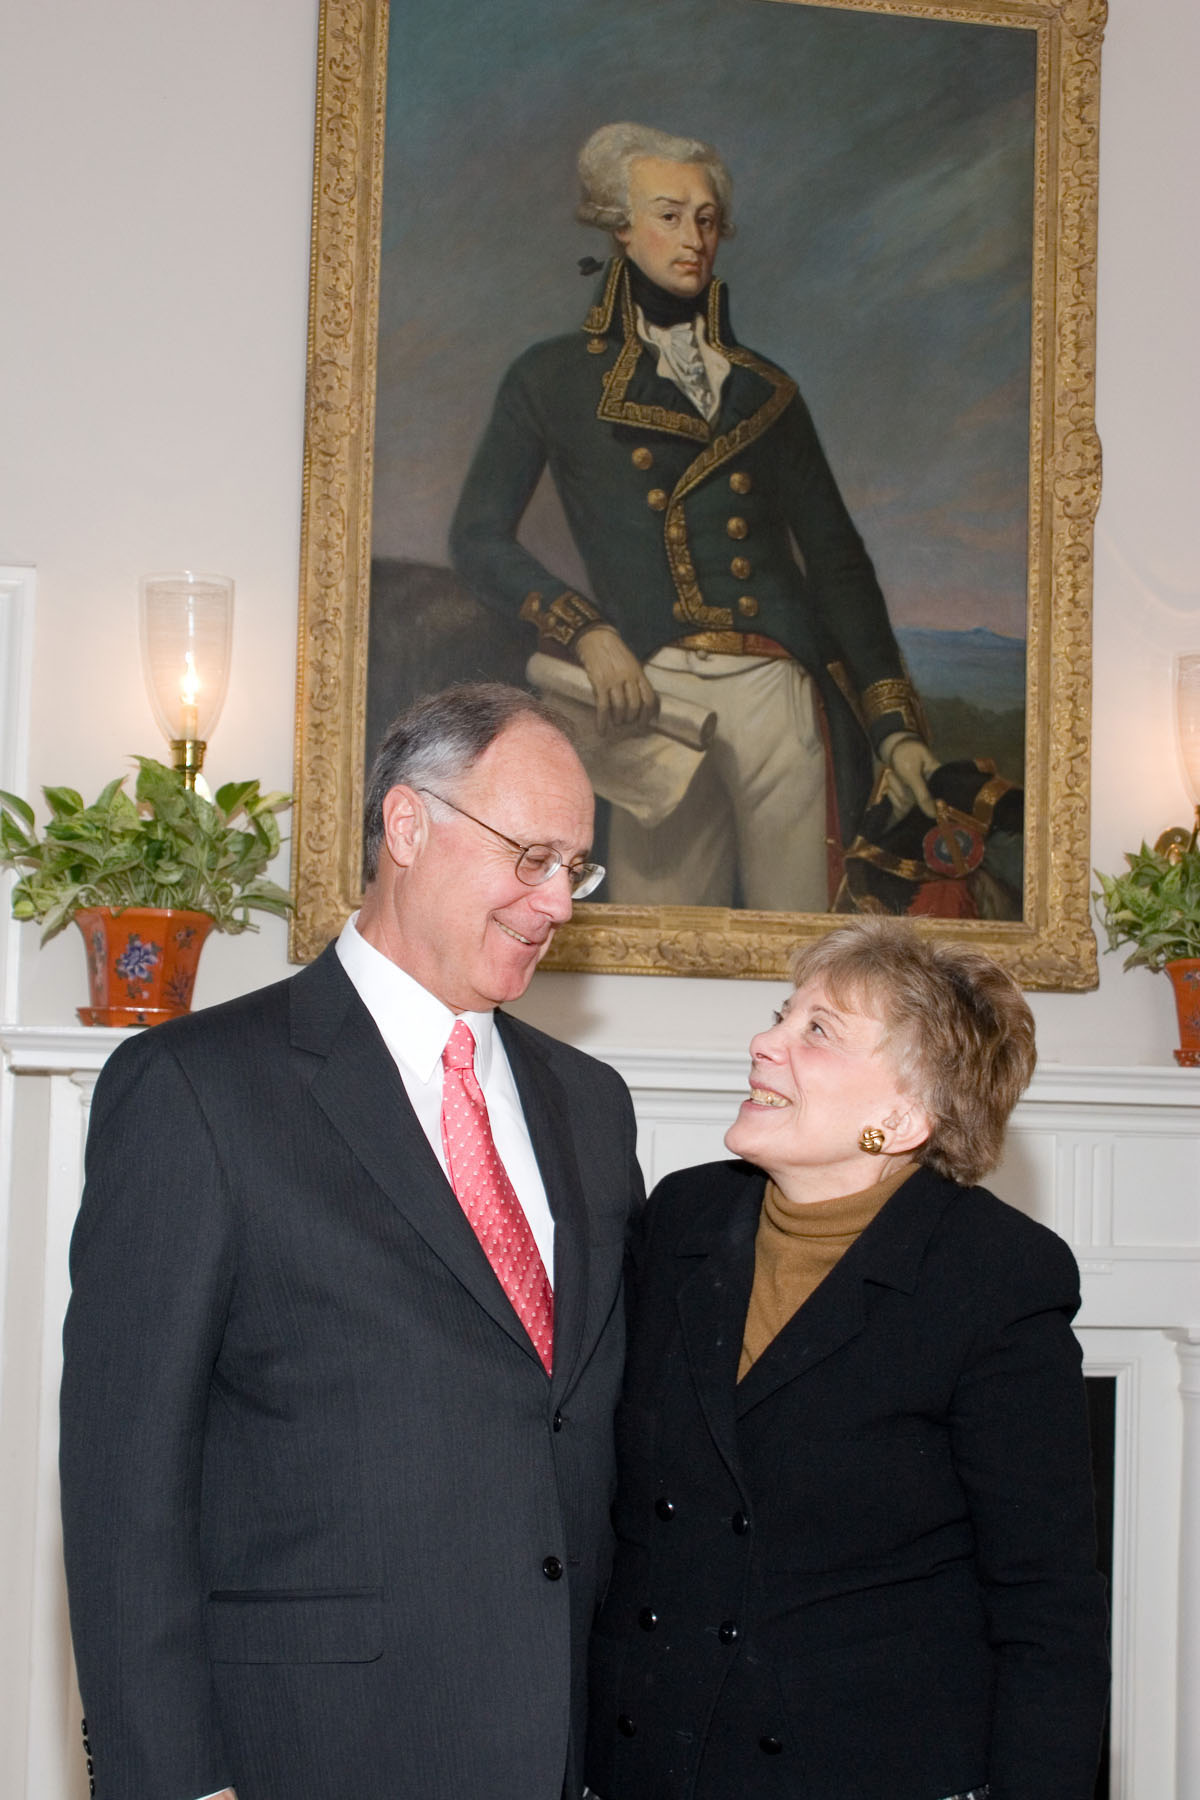 President John T. Casteen III and Evelyn Y. Davis smile at each other